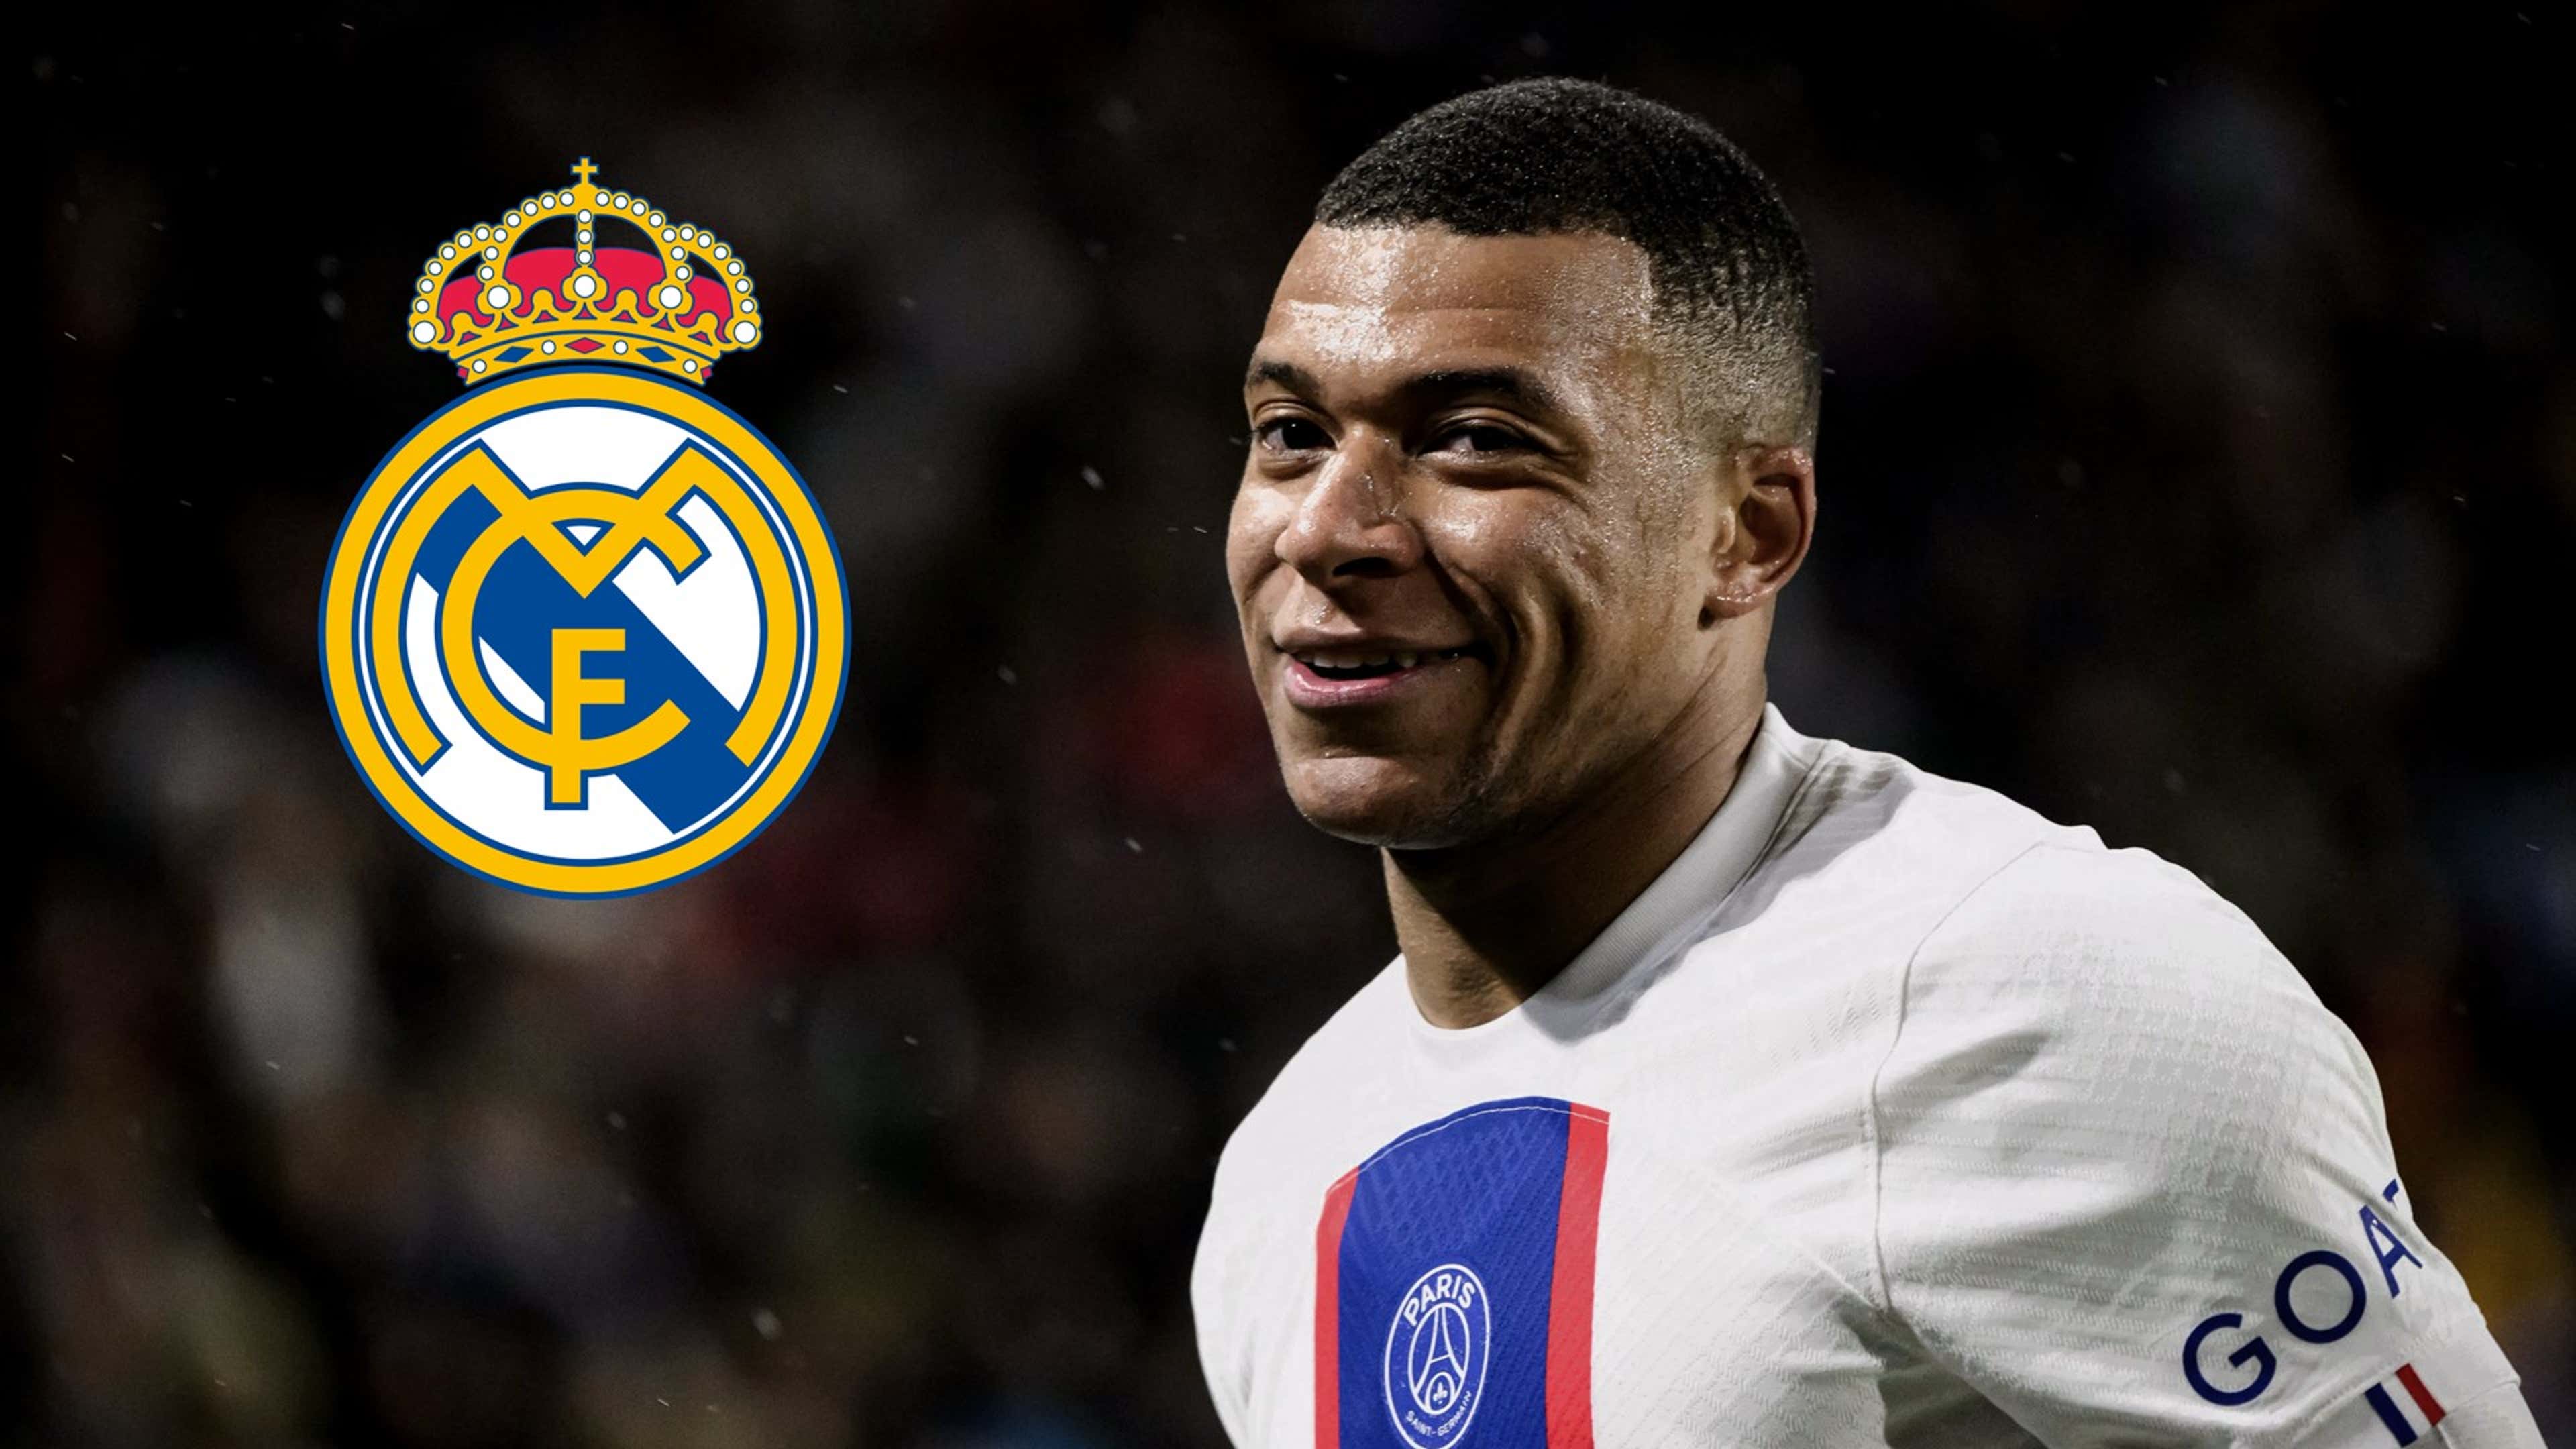 Kylian Mbappe transfer to Real Madrid will happen, claims club president Florentino Perez | Goal.com